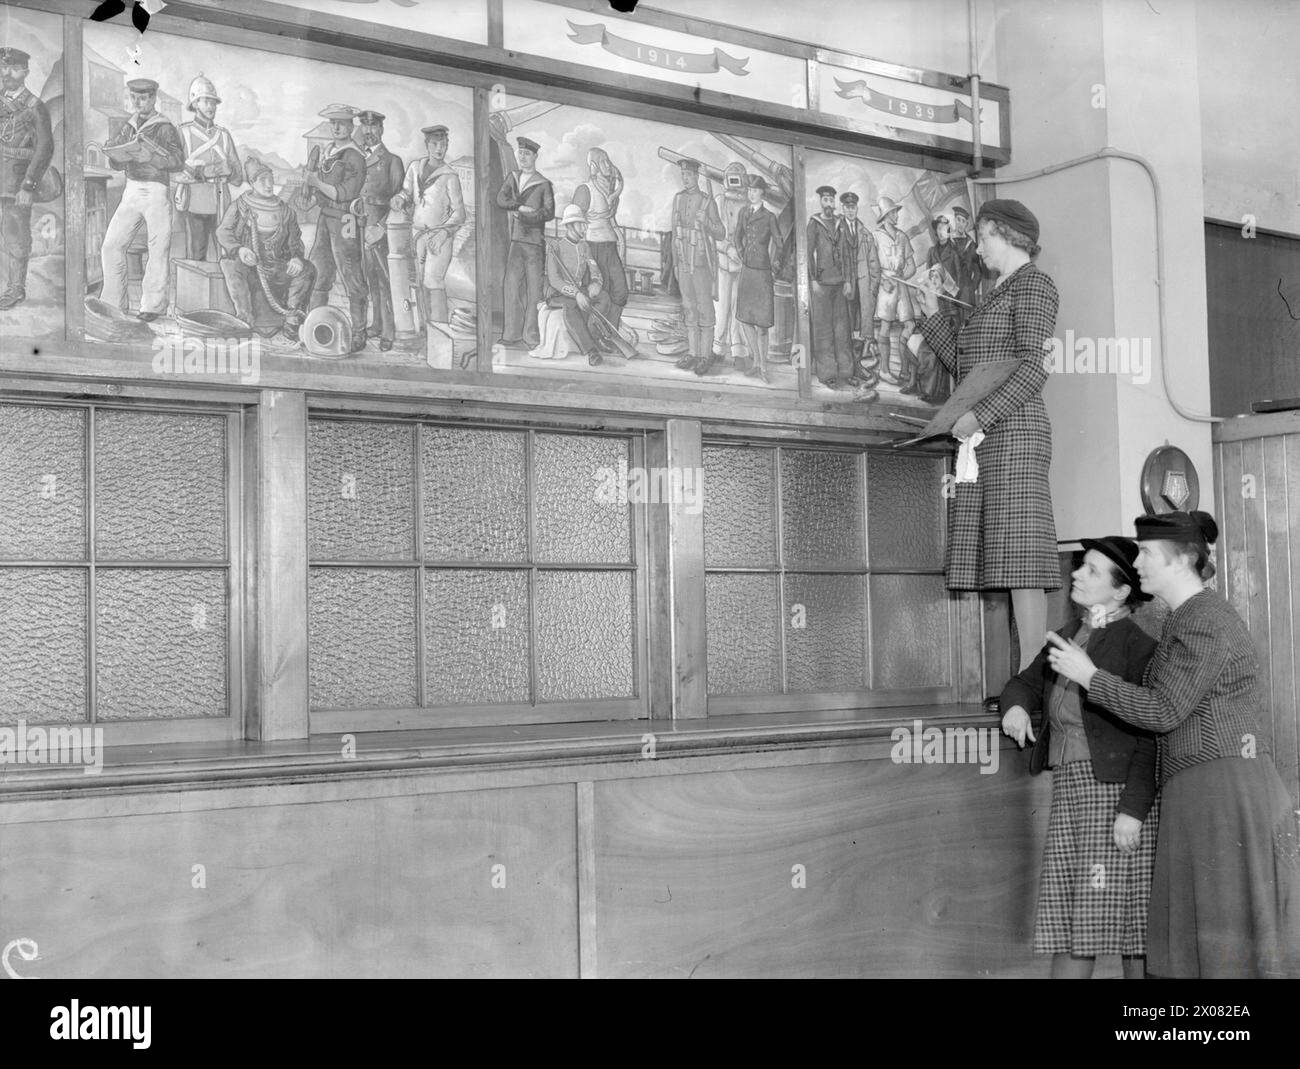 FAMOUS SCOTTISH ARTISTS VISIT A NAVAL CANTEEN. 21 JANUARY 1942, ROSYTH. SEVERAL WELL KNOWN ARTISTS VISITED A ROYAL NAVAL AND ROYAL MARINE CANTEEN, AND PAINTED THREE PANELS BY WAY OF A DECORATION. THE ARTISTS WERE MRS HASWELL MILLER, ARSA, ANNE REDPATH (NOW MRS MICHIE) AND MRS MARY ARMOUR, ARSA. MR W C HUTCHINSON ALSO VISITED THE CANTEEN TO SIGN HIS PAINTING OF THE BATTLE OF CAMPERDOWN. - Mrs Haswell Miller adding some finishing touches to her panel while Mrs Mary Armour and Anne Redpath look on Stock Photo